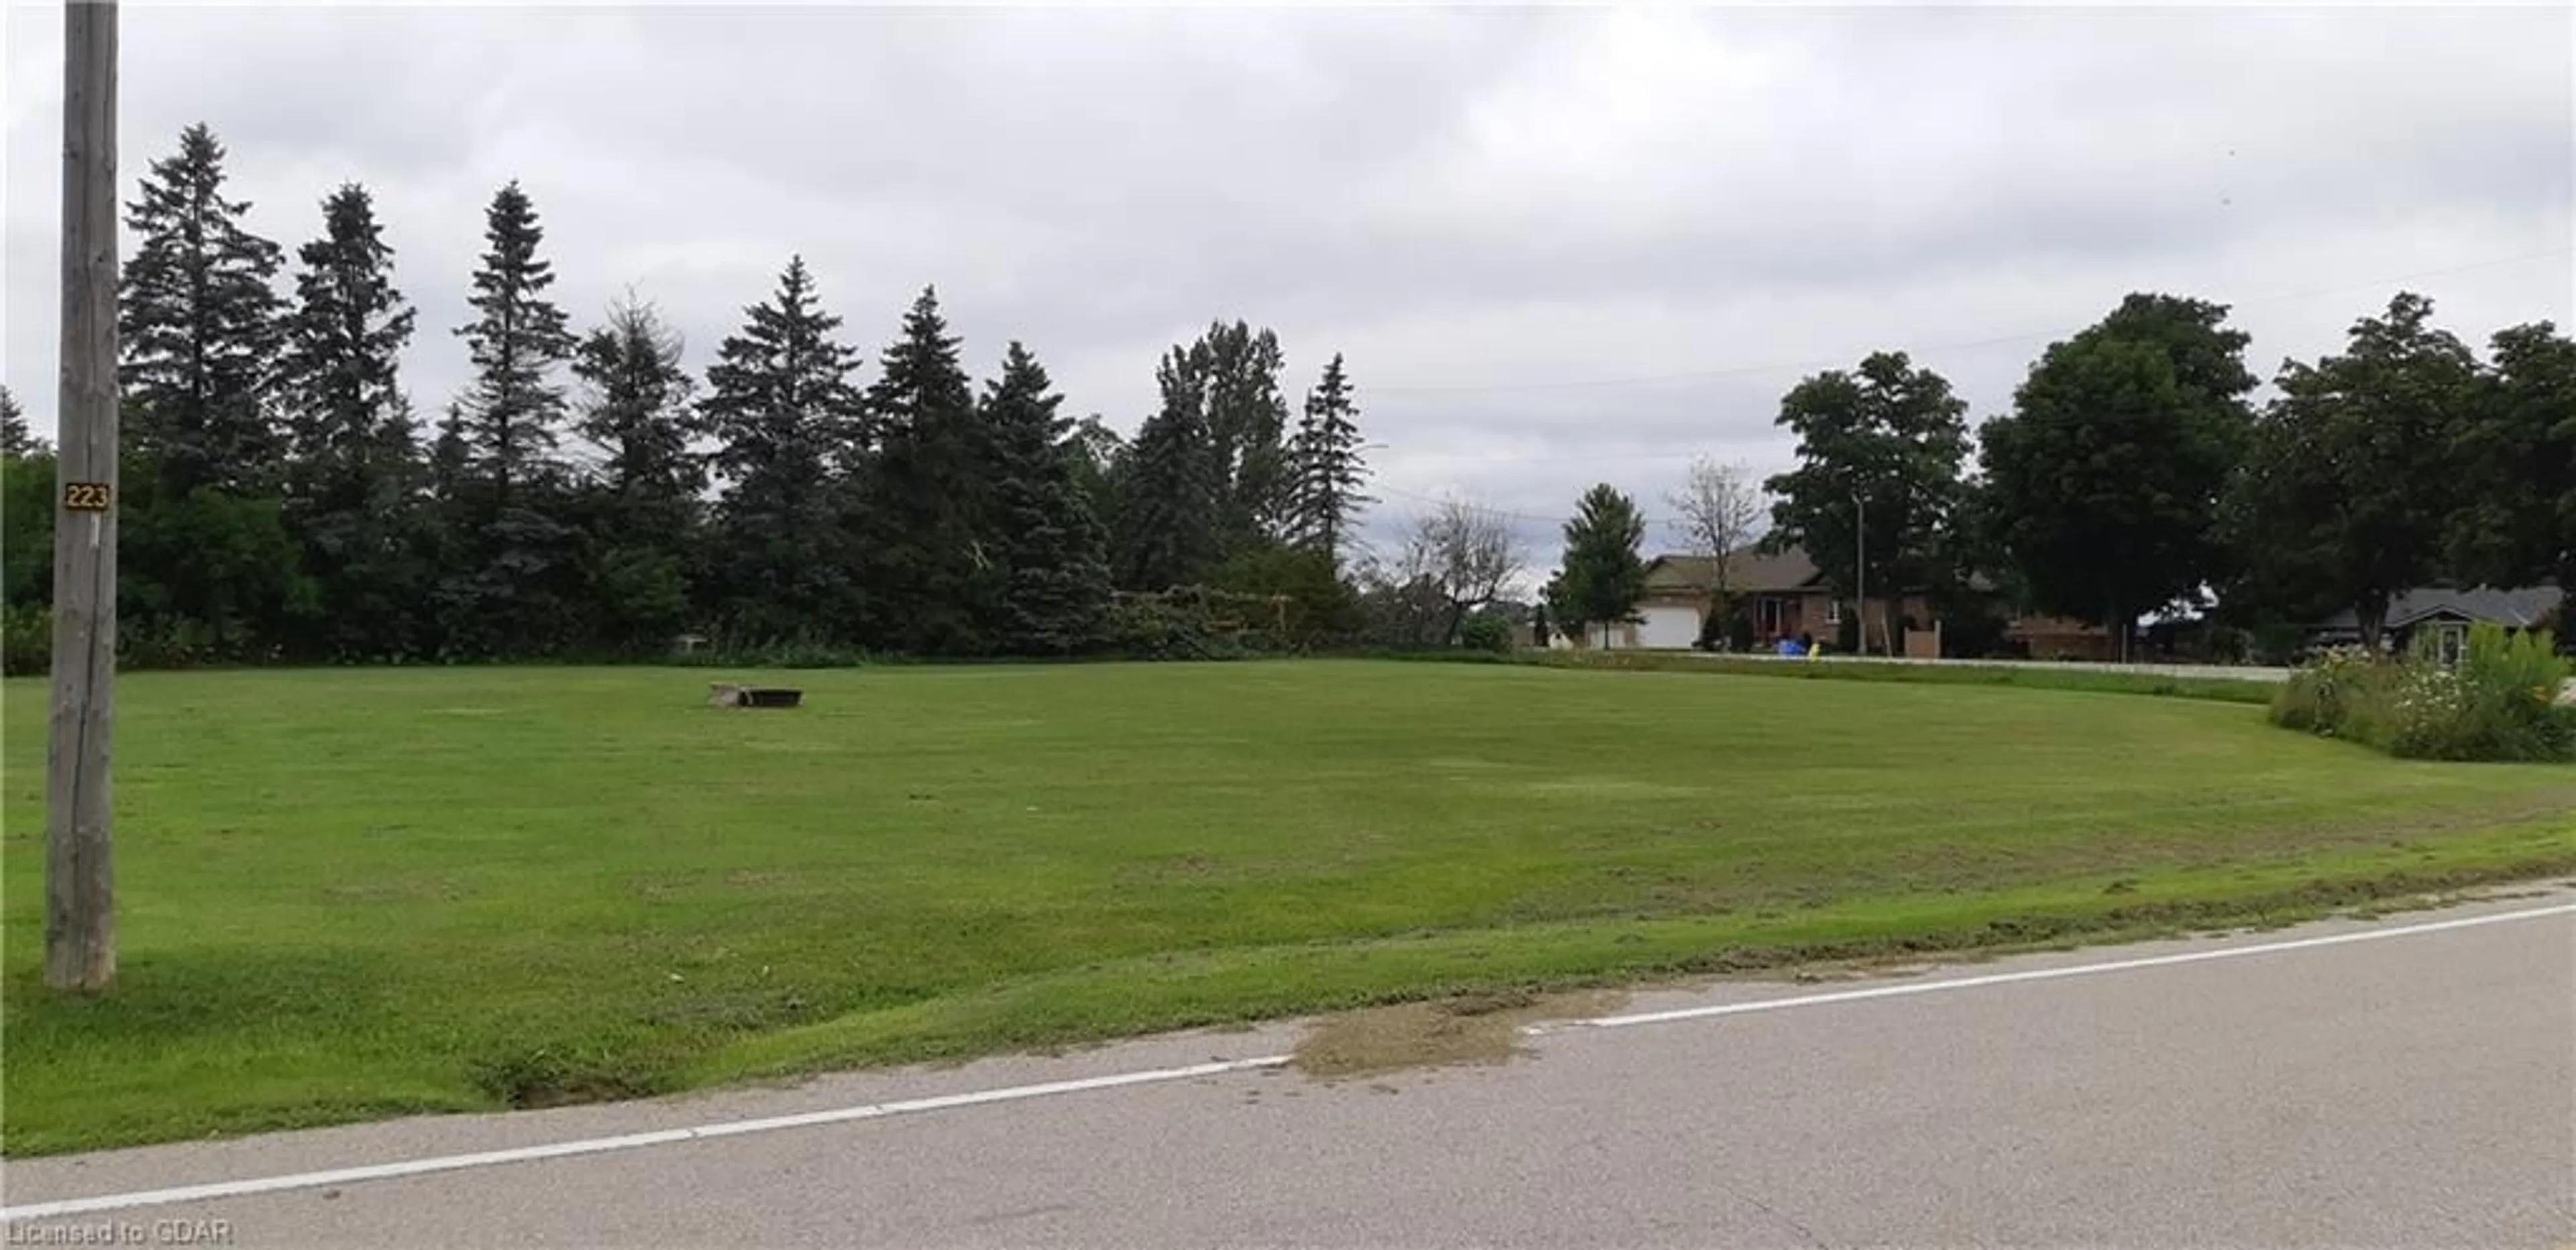 Street view for 70 Head St, Rothsay Ontario N0G 2K0